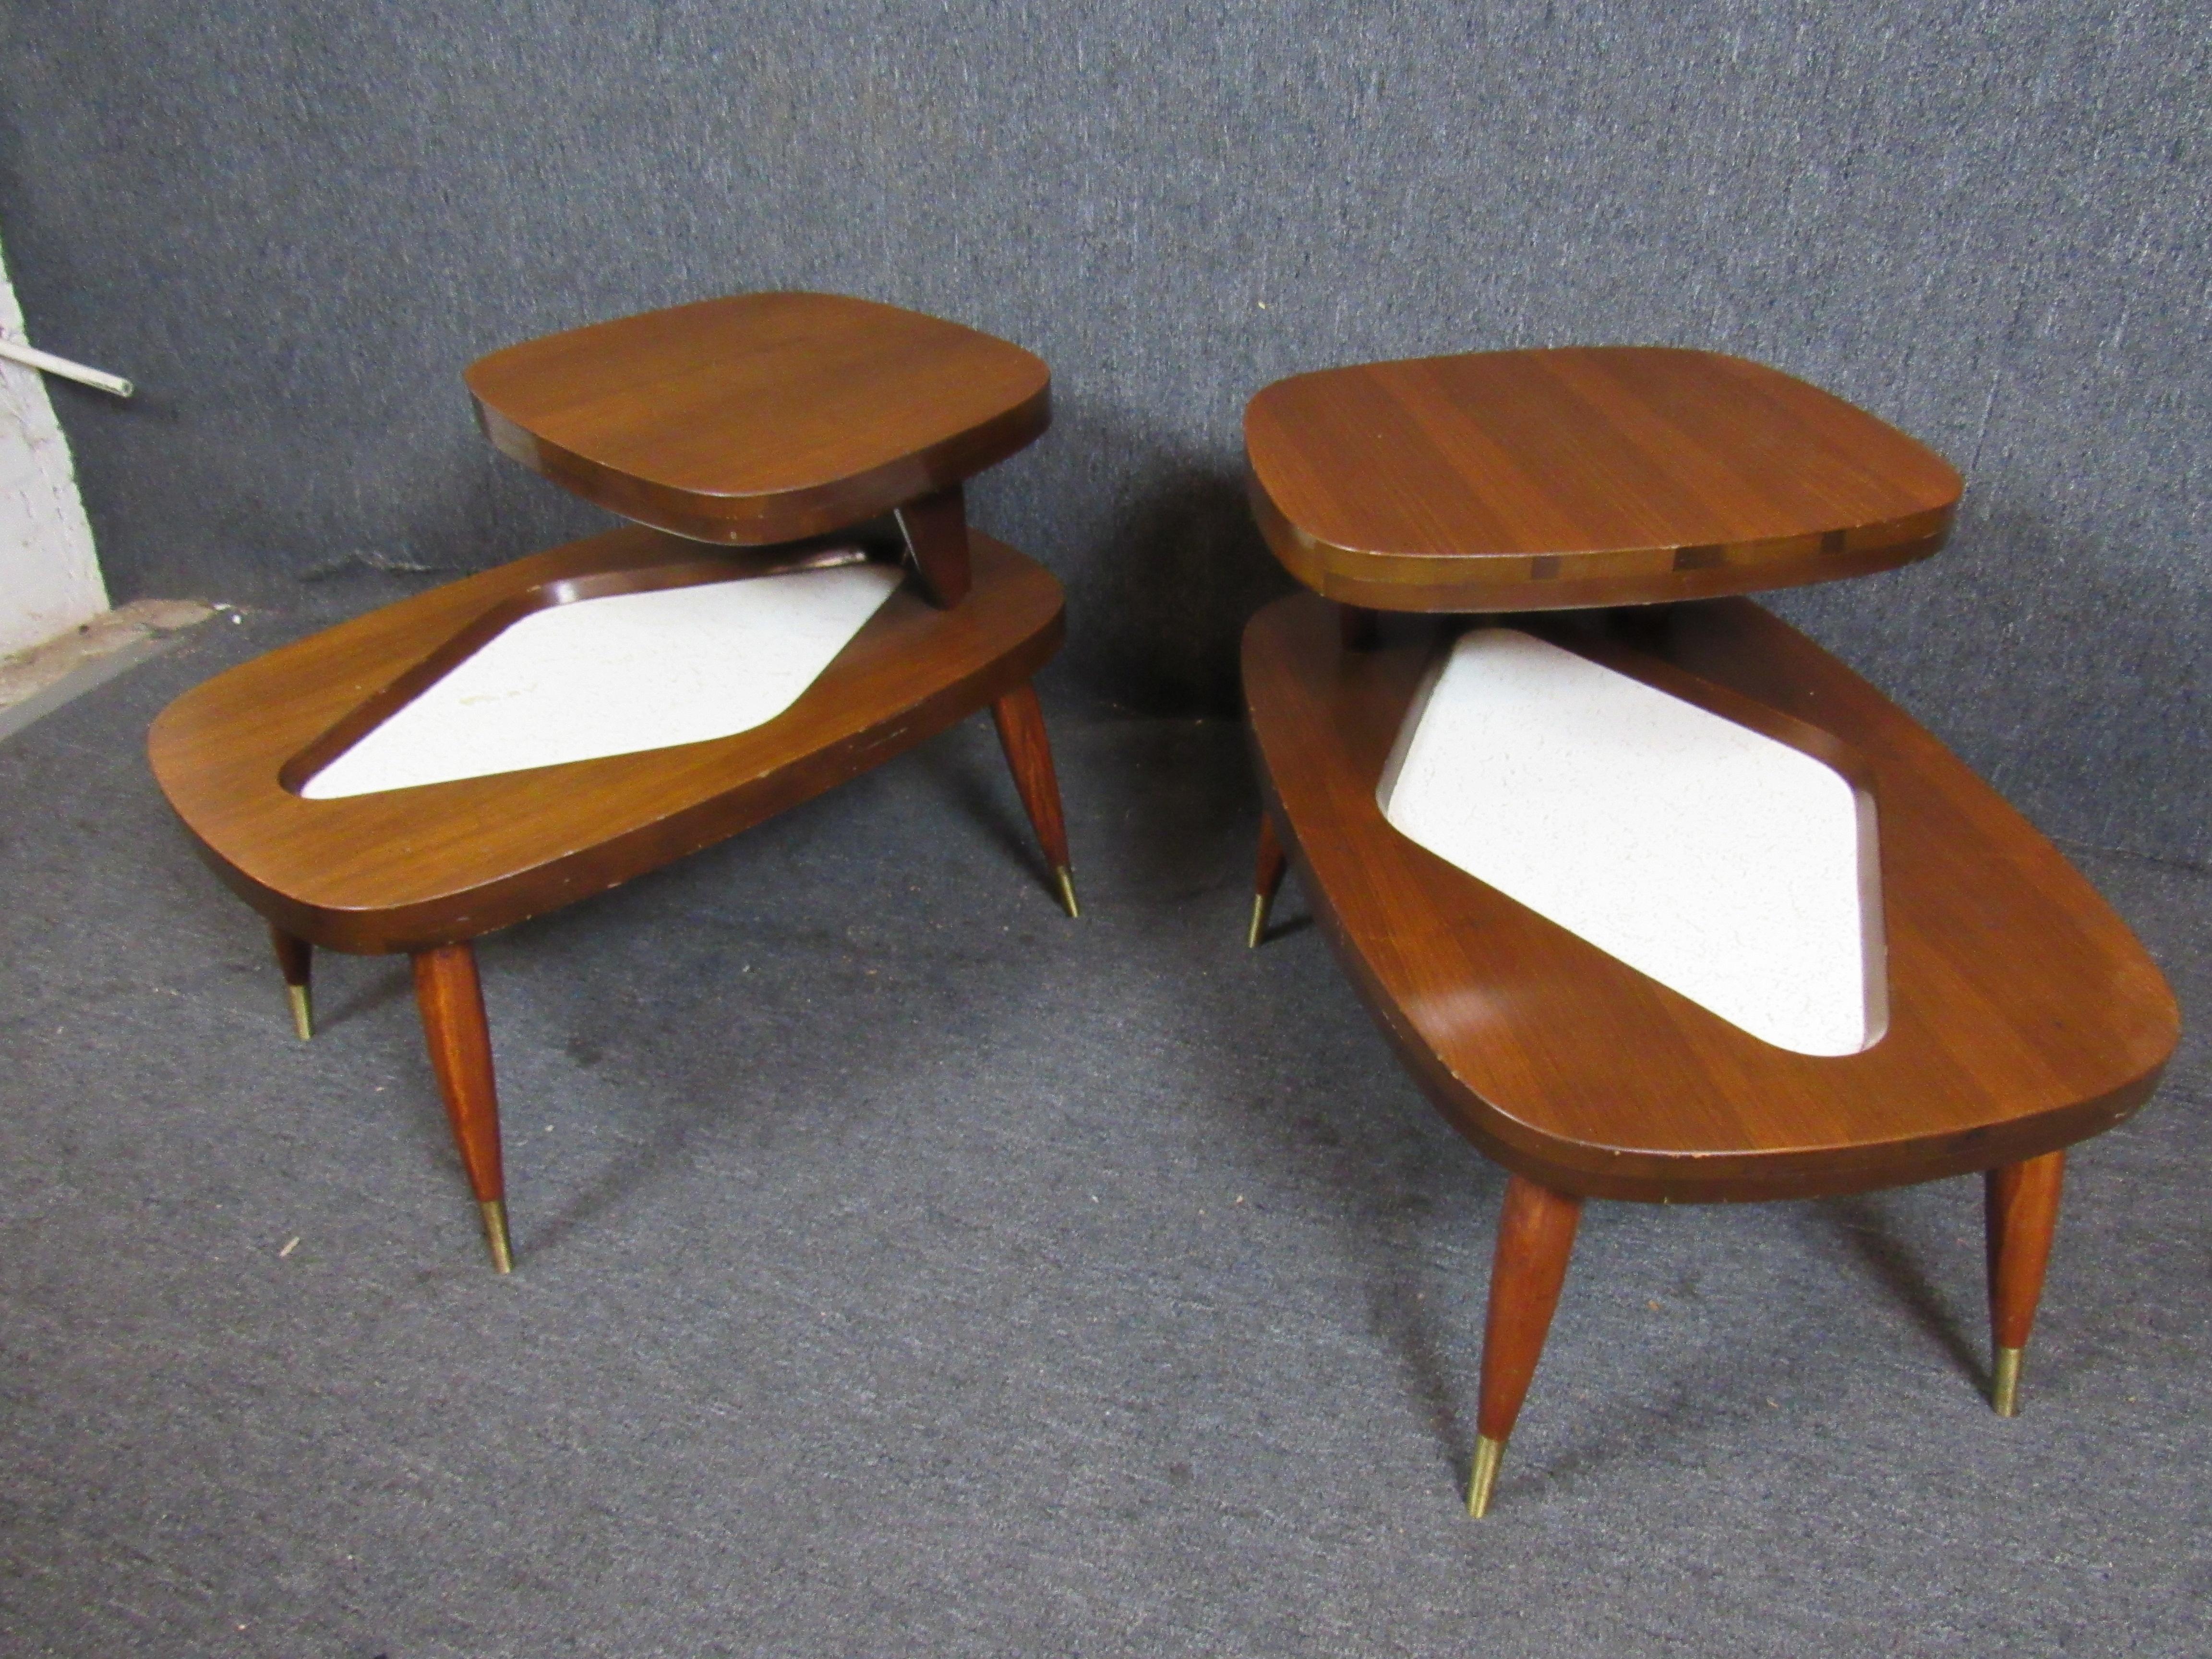 Absolutely fantastic pair of unique formica & walnut end tables. A funky two-tiered design is as practical as it is appealing. A perfect addition for any retro room in the home or office. Please confirm item pickup location (New York or New Jersey)